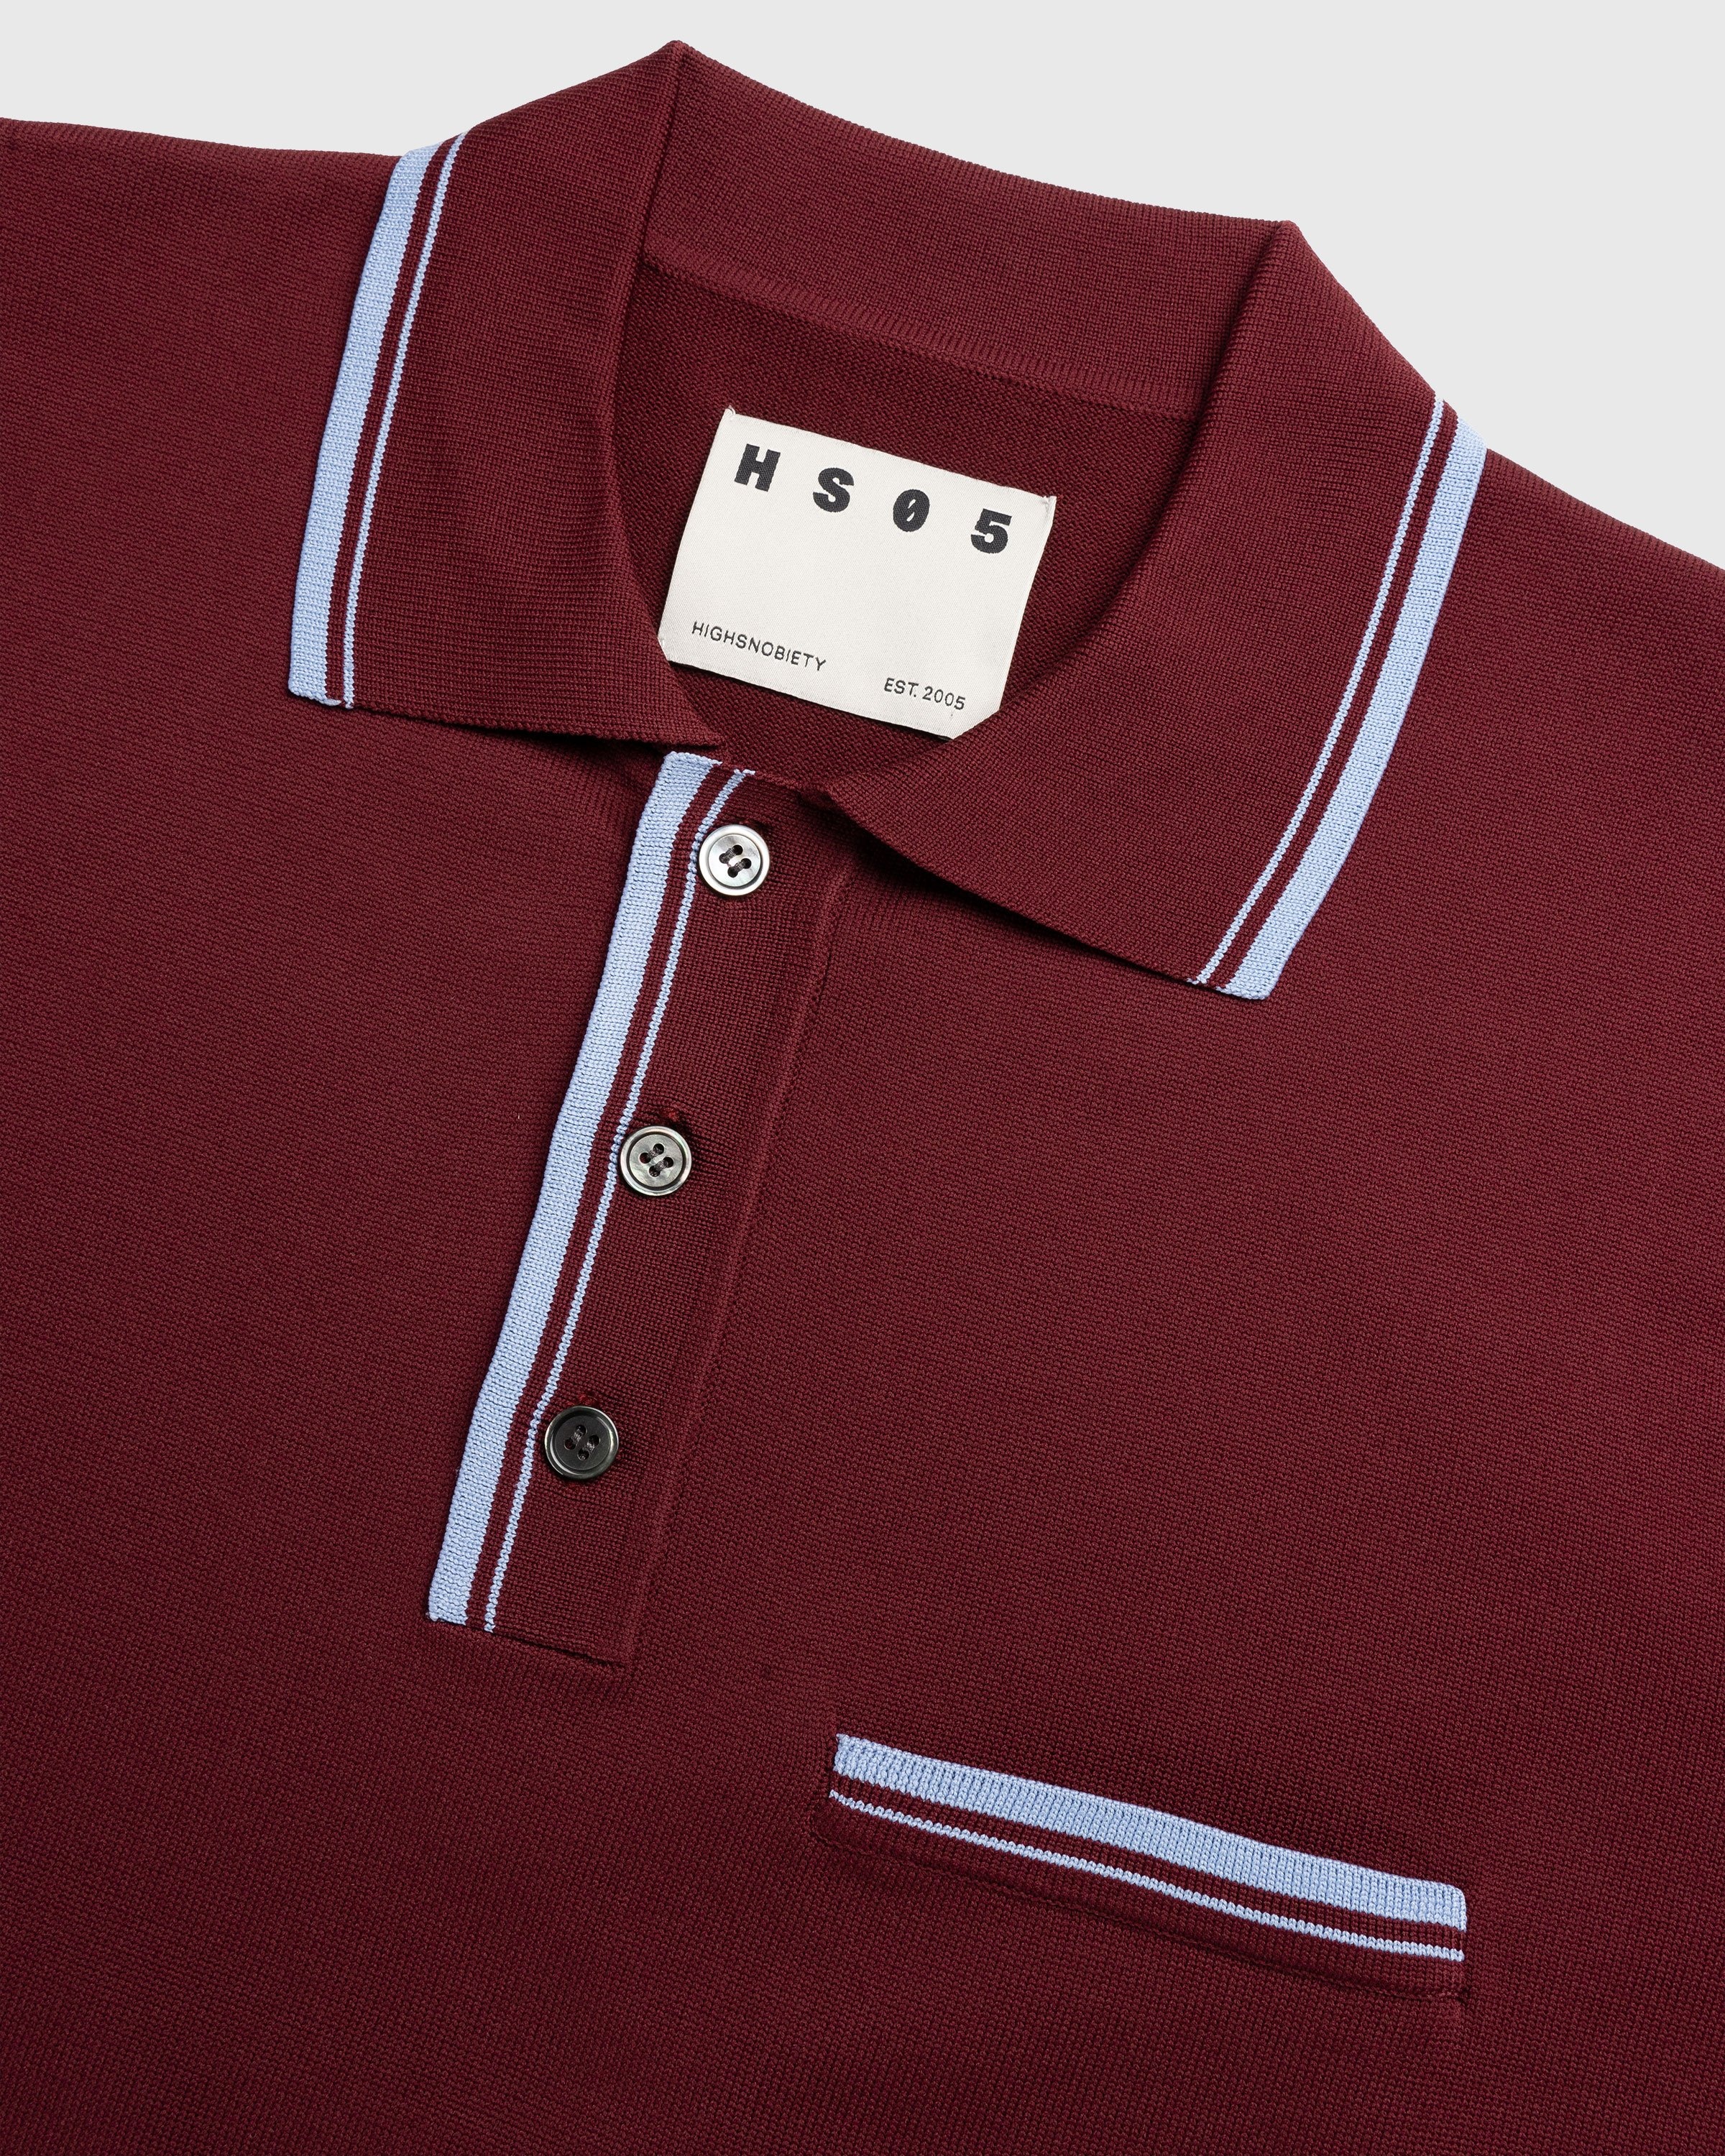 Highsnobiety HS05 – Long Sleeves Knit Polo Bordeaux - Longsleeves - Red - Image 6